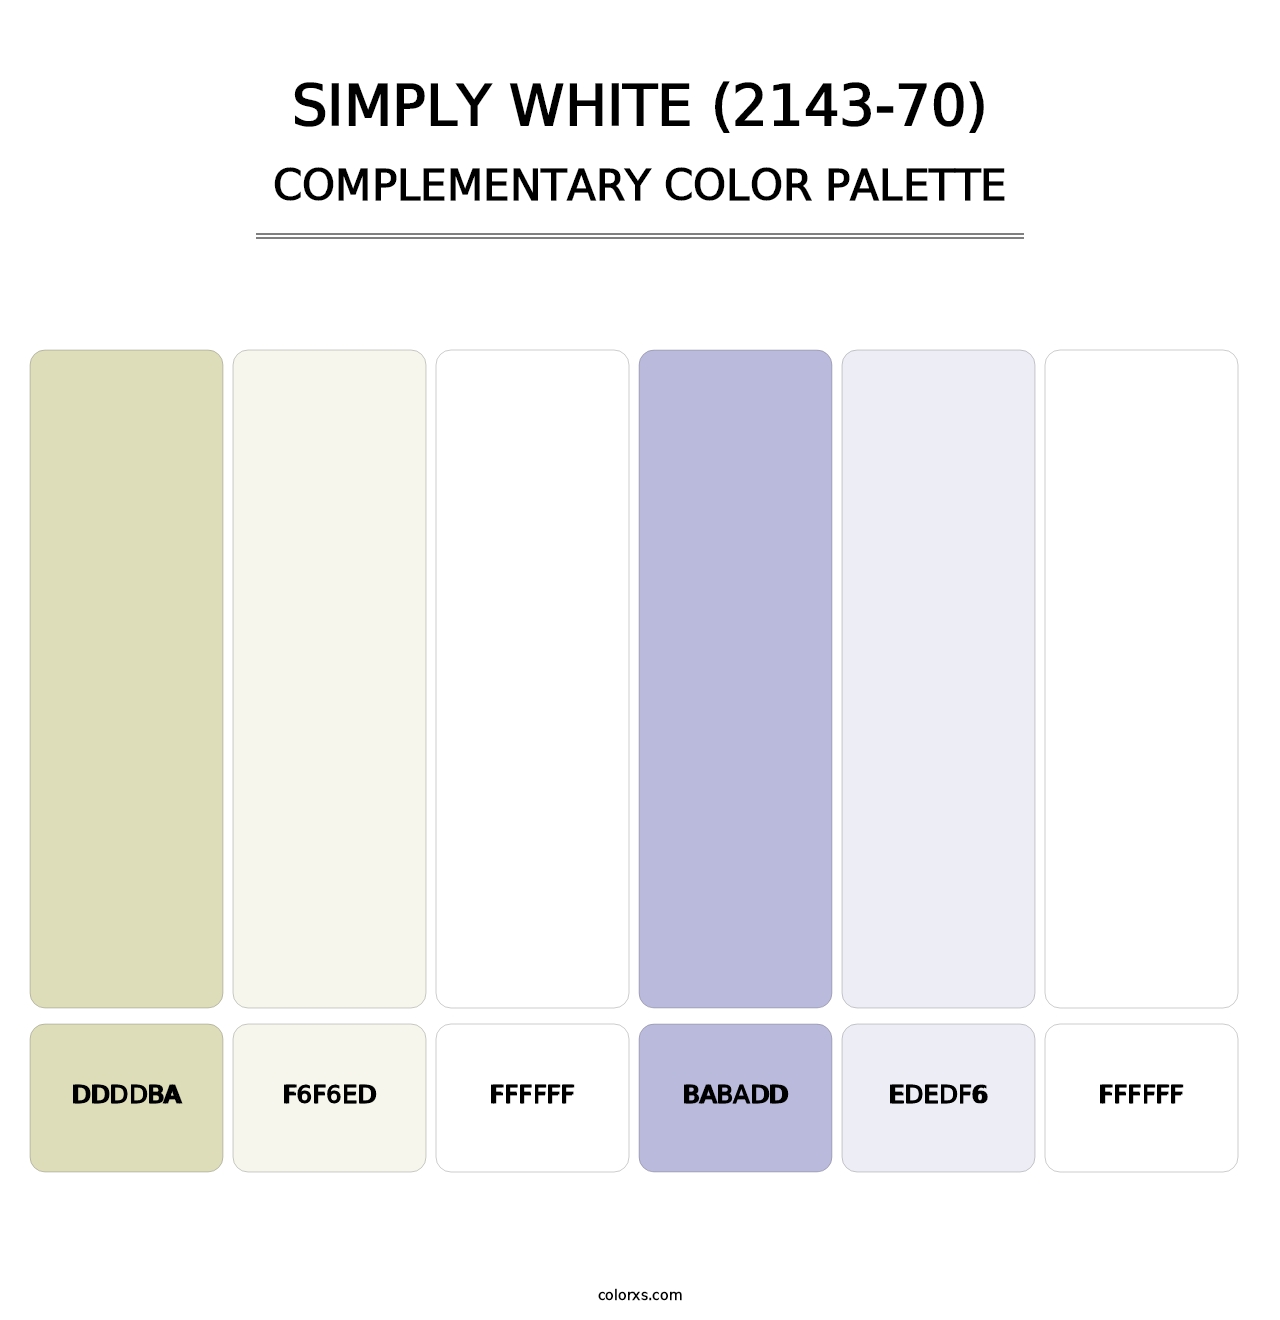 Simply White (2143-70) - Complementary Color Palette